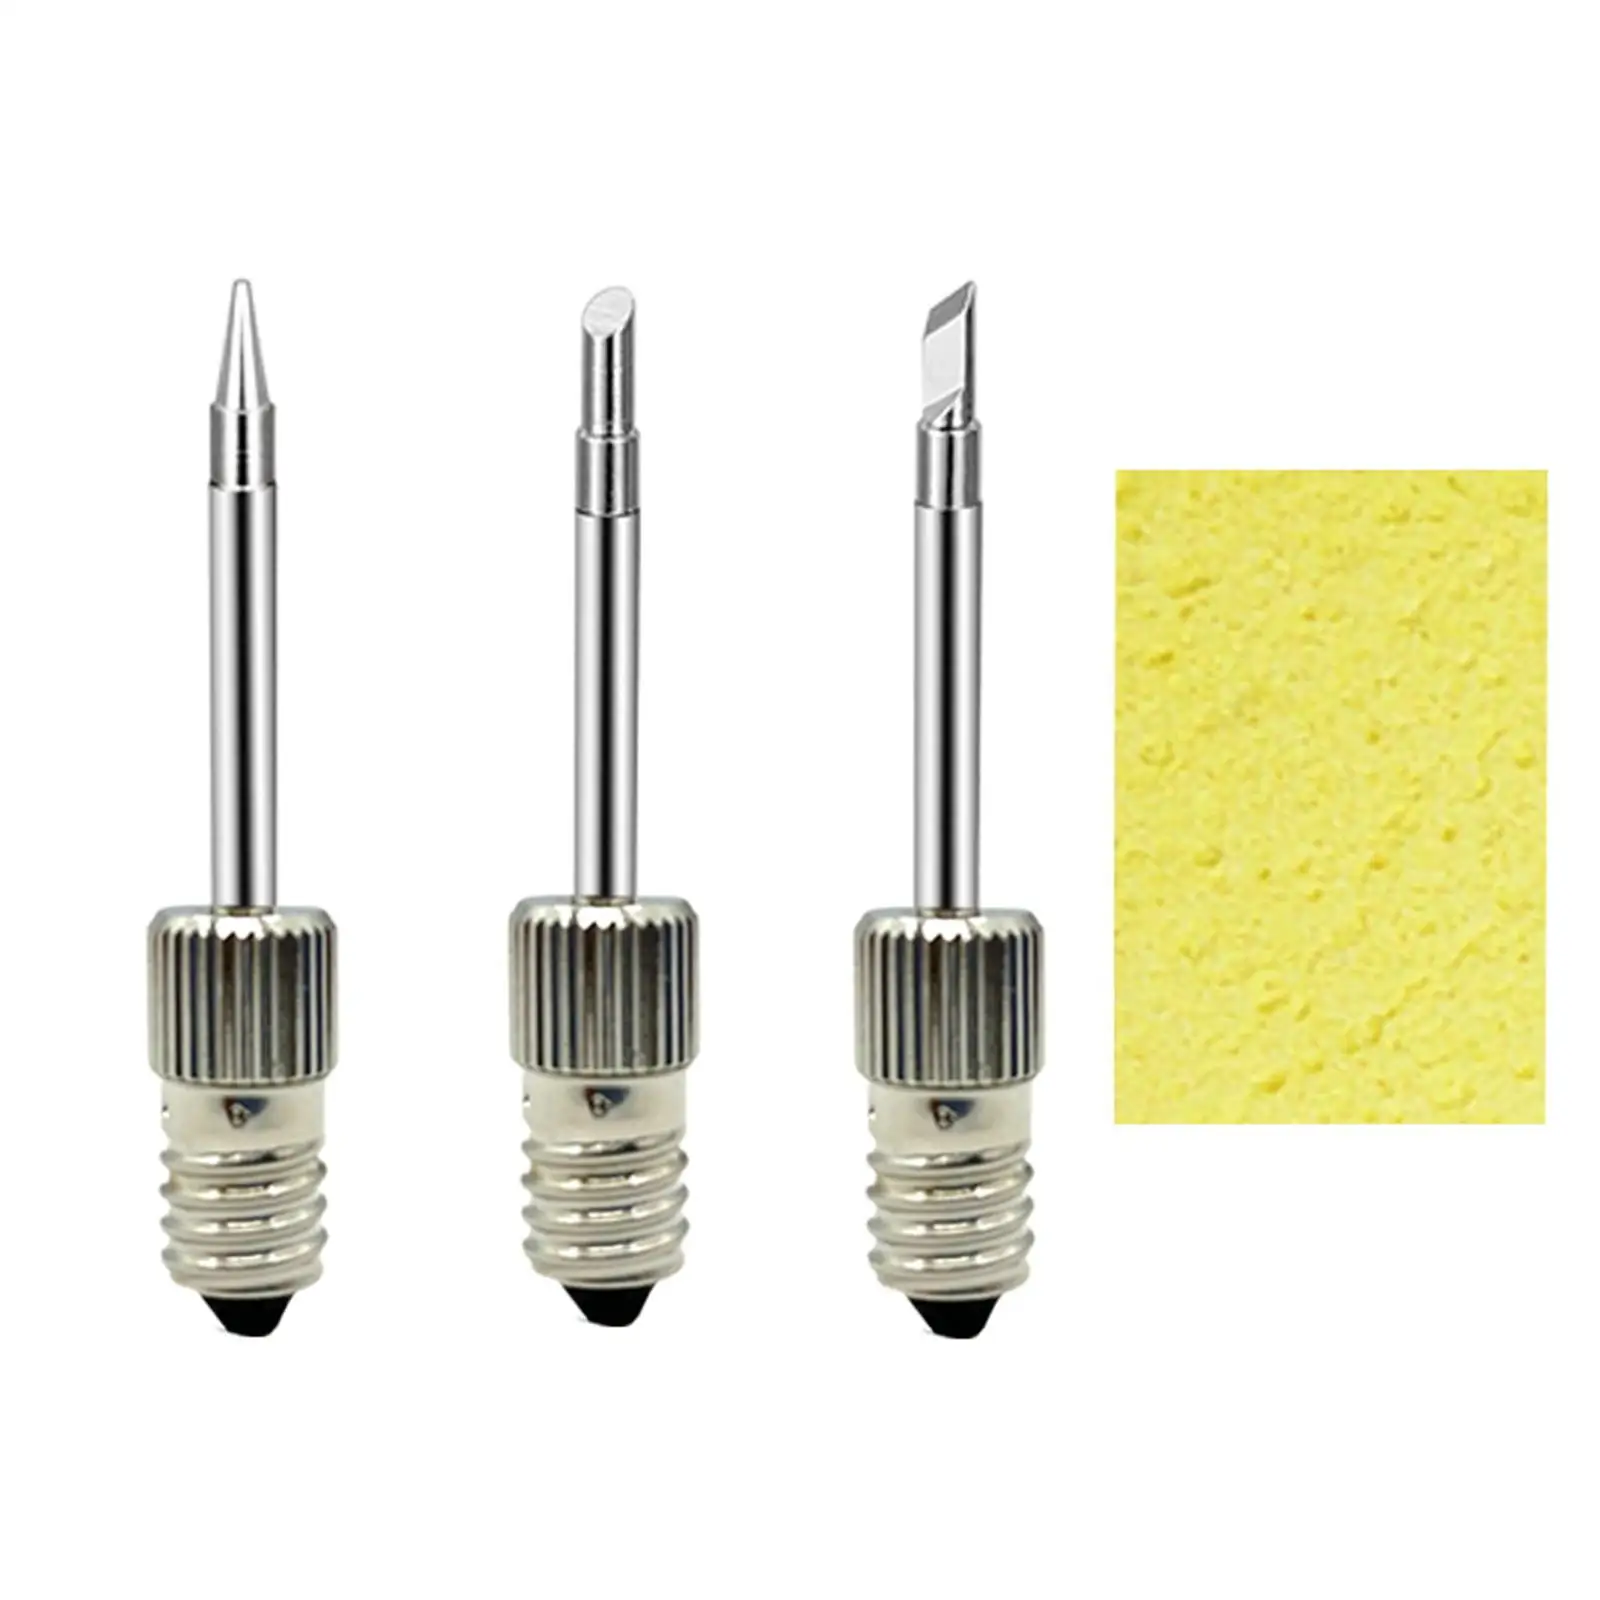 3 Pieces Soldering Tips Replacement for E10 Interface Soldering Tips Tools